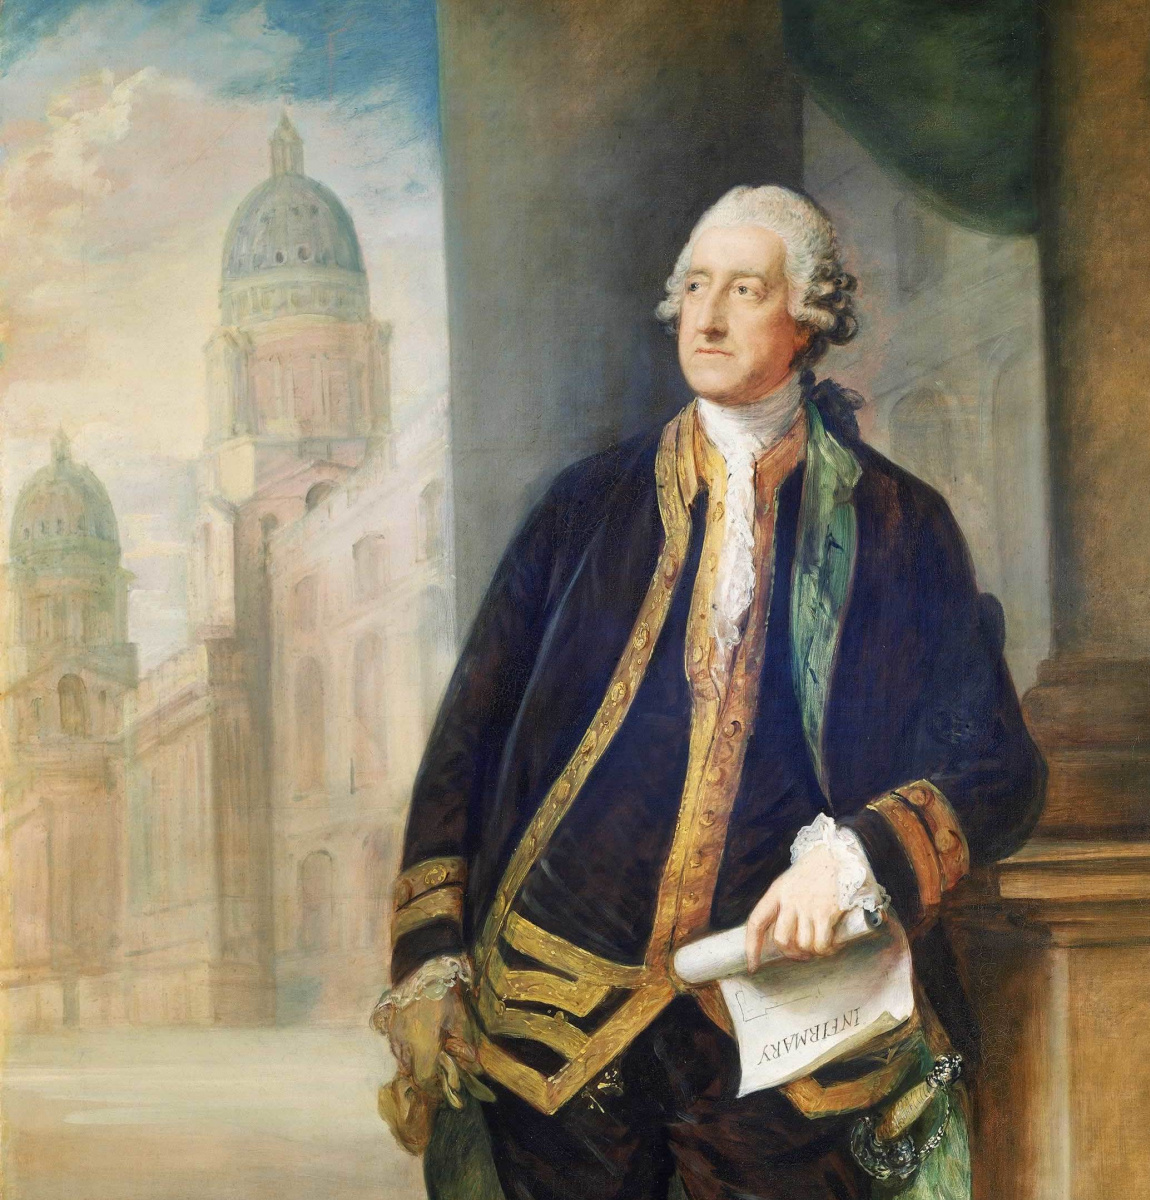 Thomas Gainsborough. John Montagu, 4th Earl of Sandwich, 1st Lord of the Admiralty. Fragment